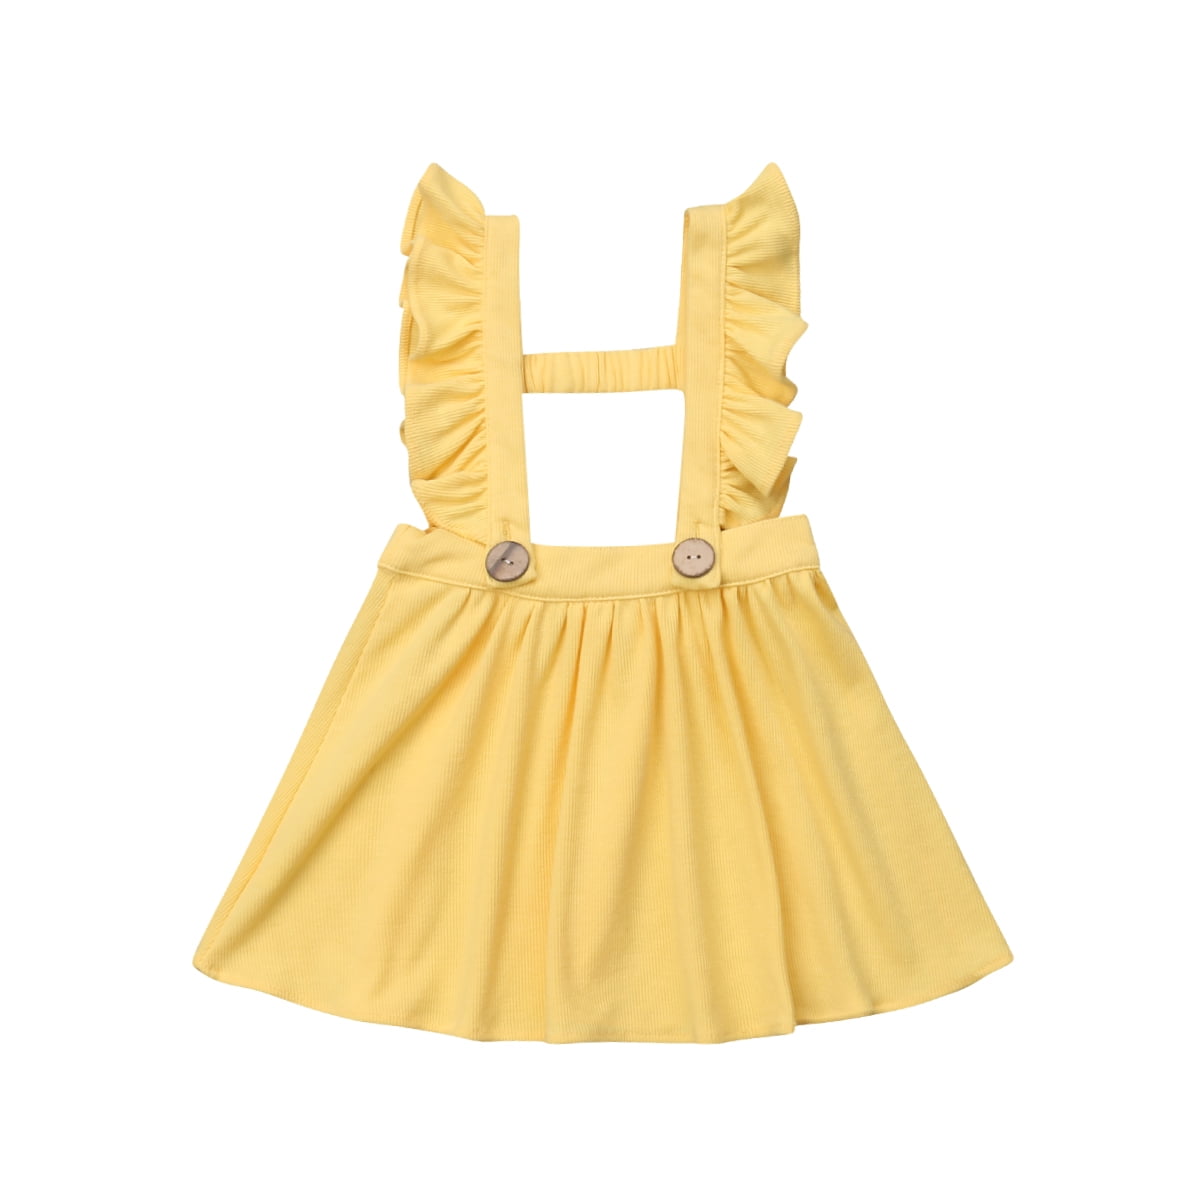 Combclub One Piece Toddler Baby Girls Ruffle Dress Sleeveless Dresses Suspender Skirt Solid Casual Party Dress 